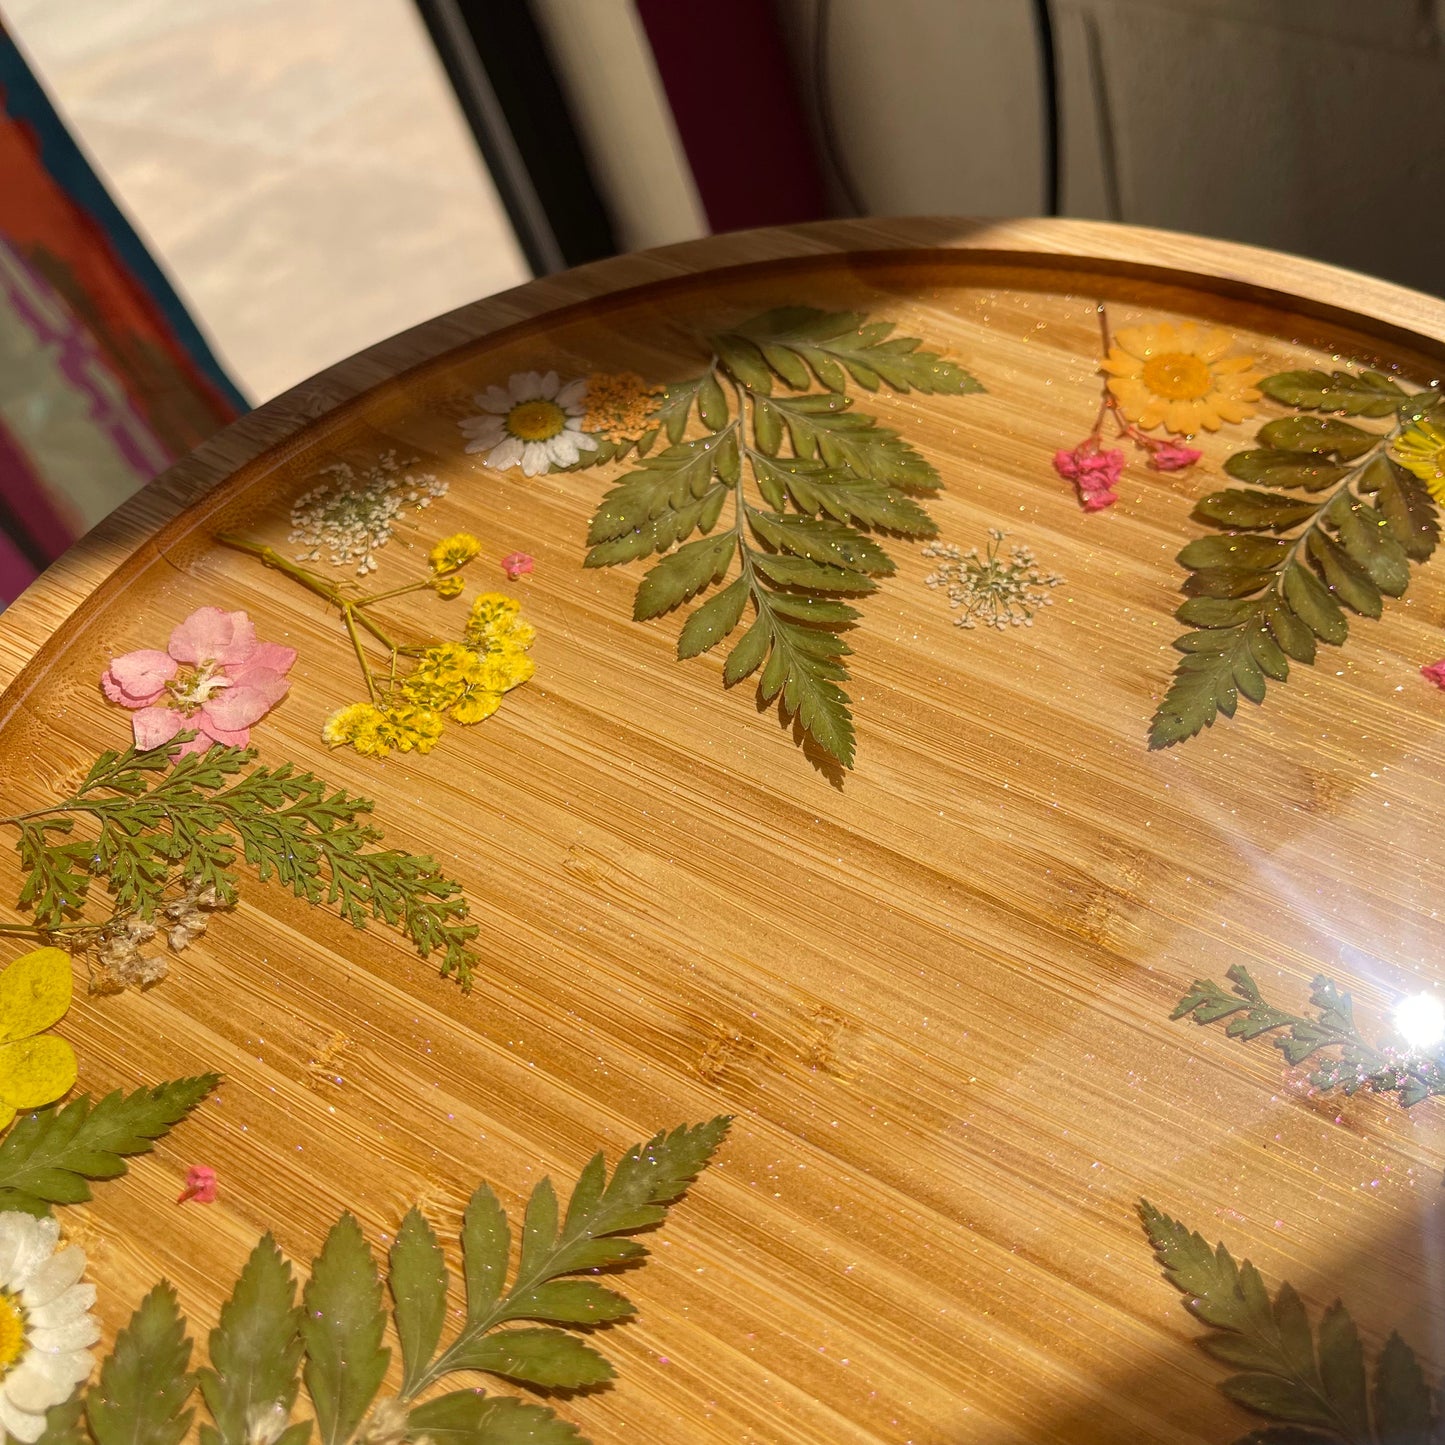 Resin Class - Flower Tray - 9/23 @ 1pm